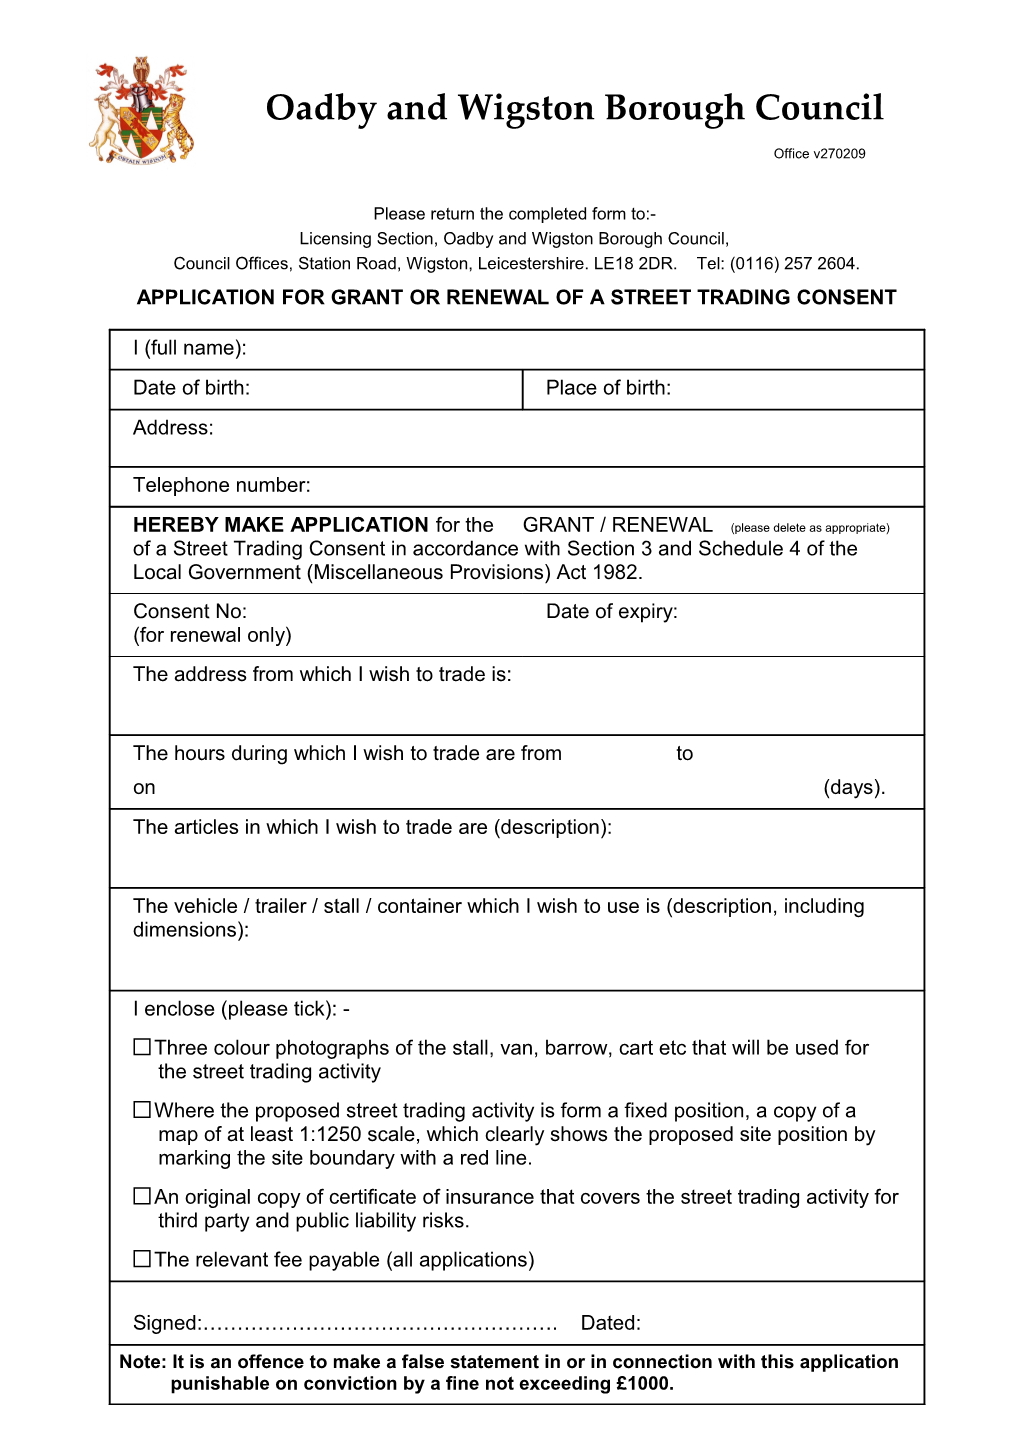 Application Form for Street Trading Consent